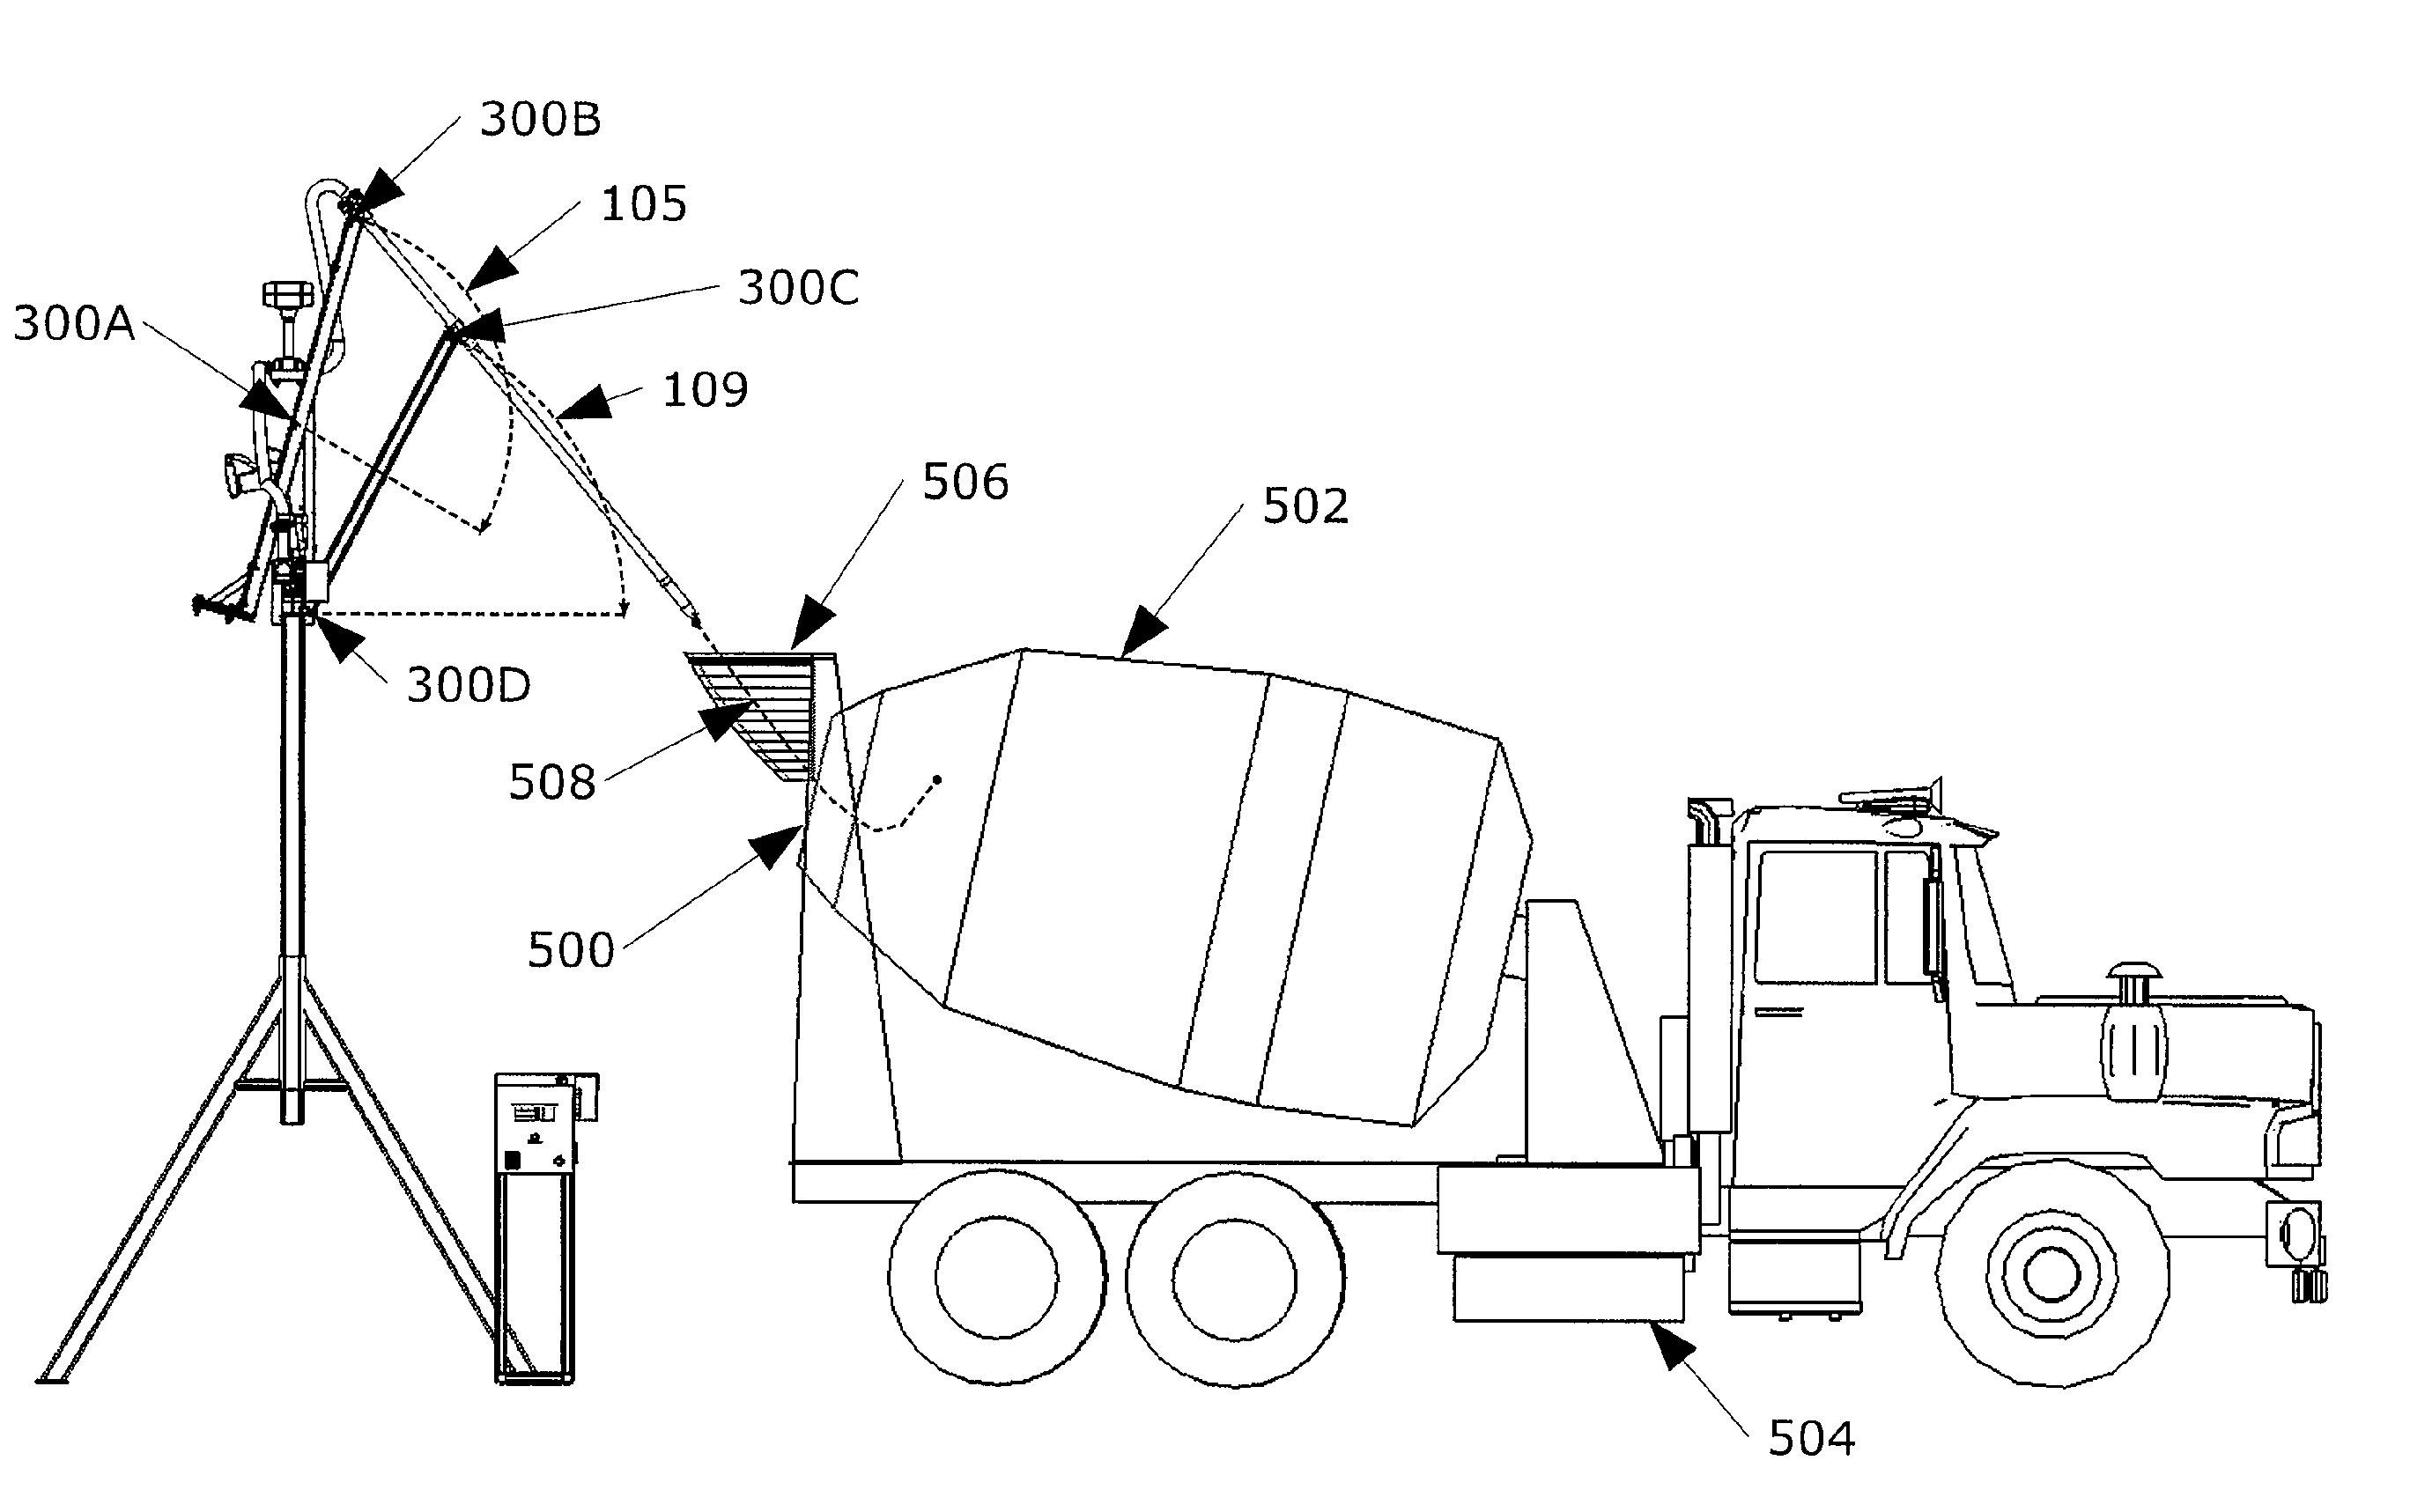 System and process for introducing a rigid lance into a concrete mixing truck using an articulated arm